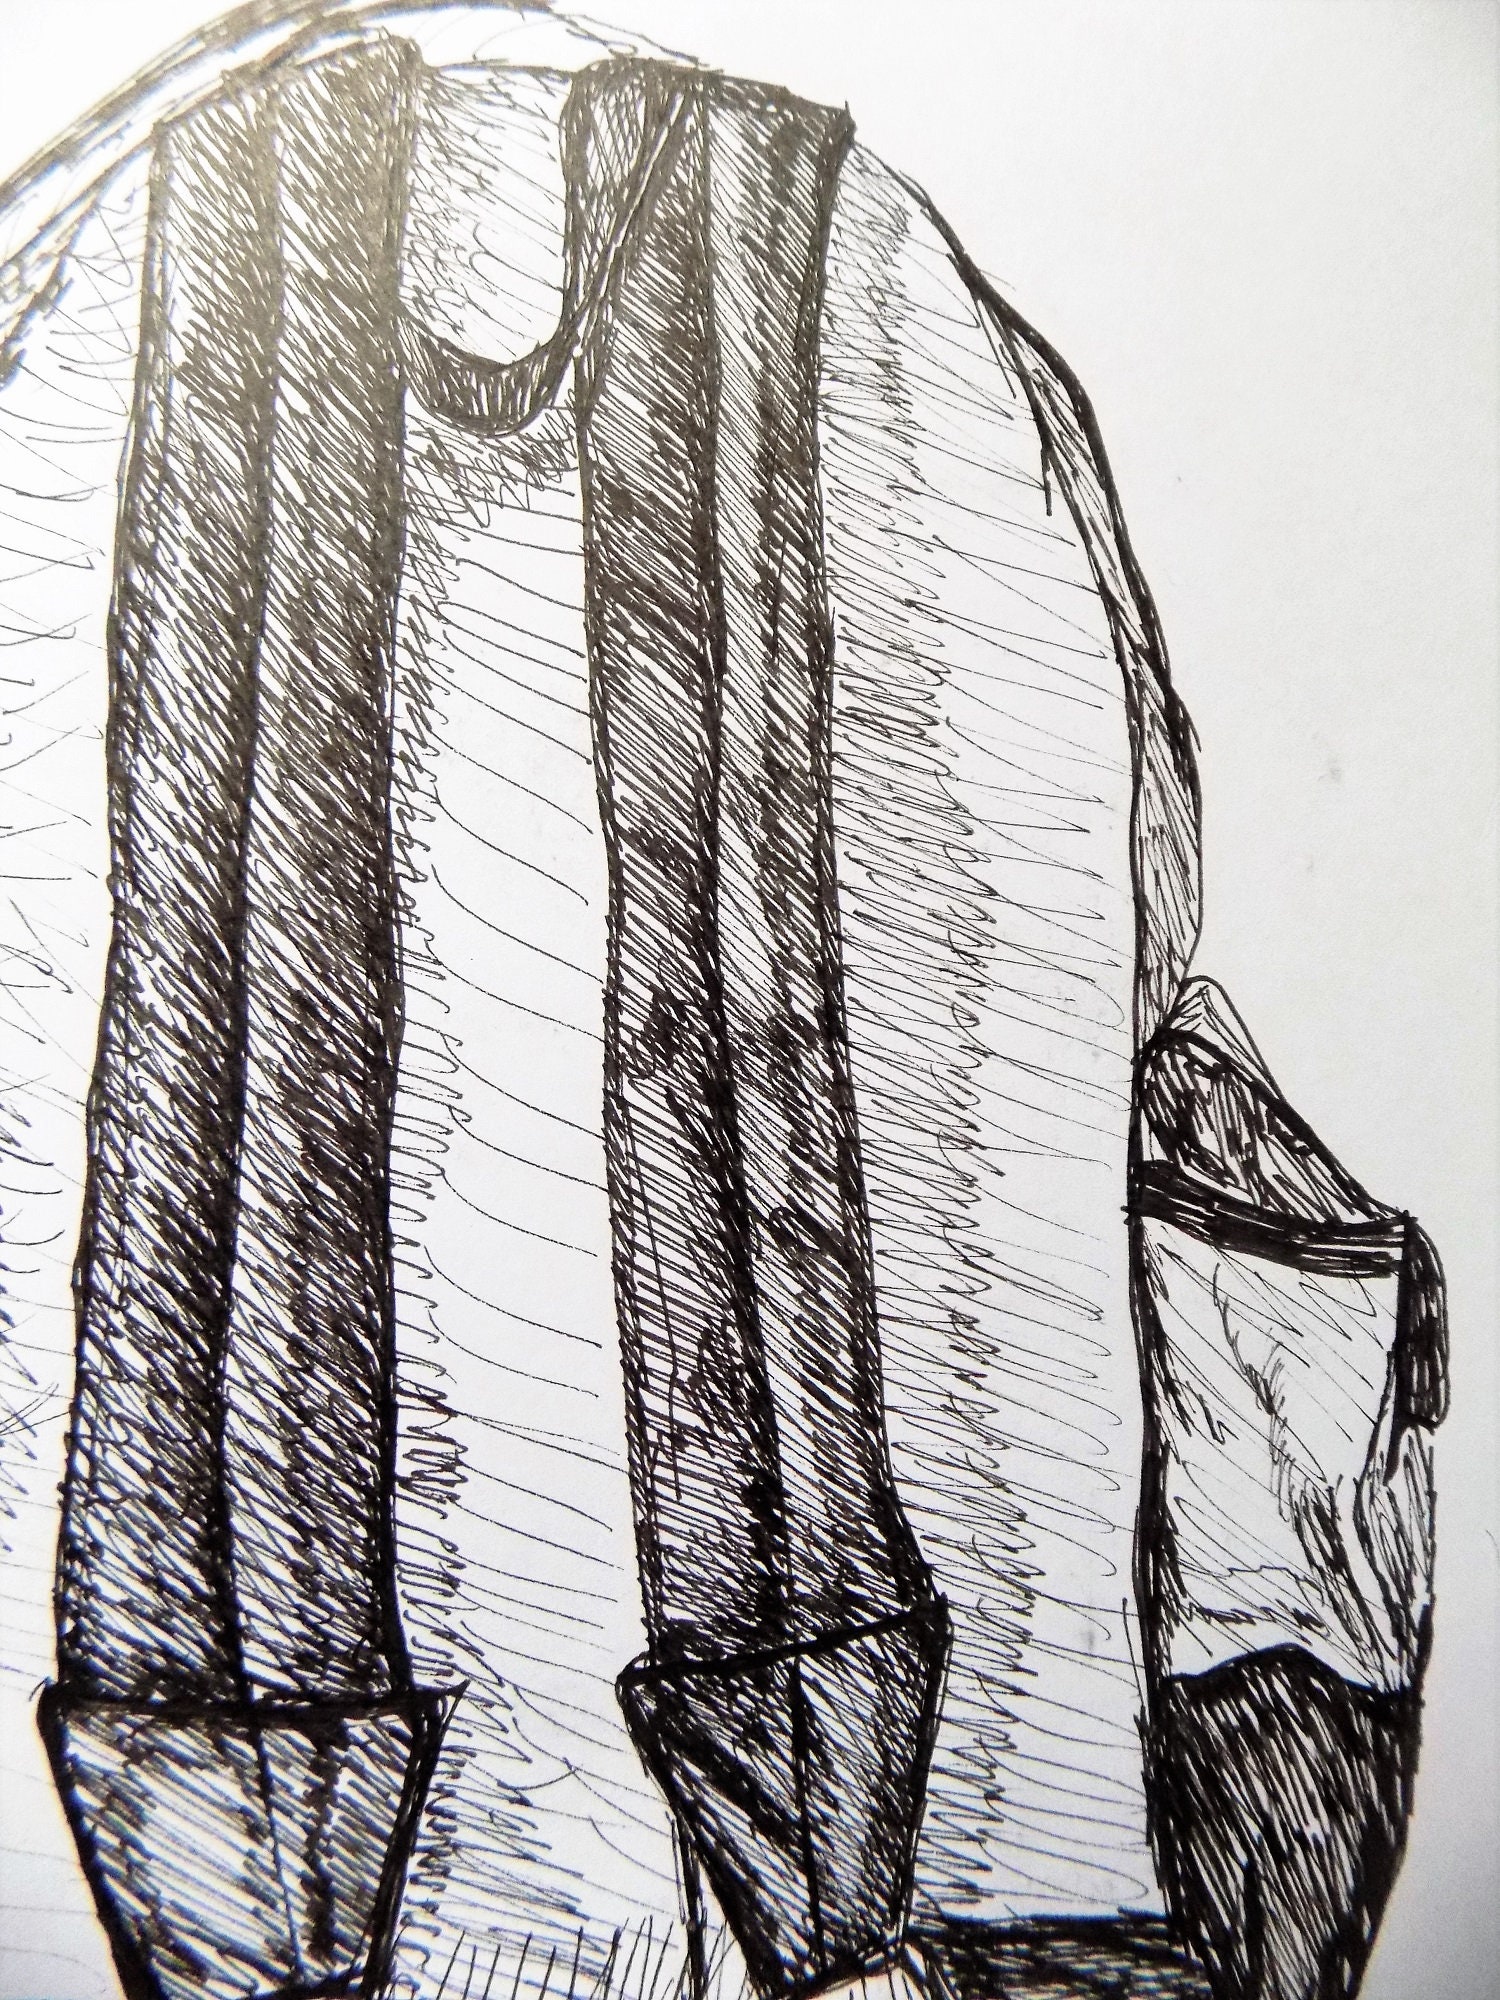 Pen and Ink Backpack Sketch Pen and Ink Drawing of Backpack 